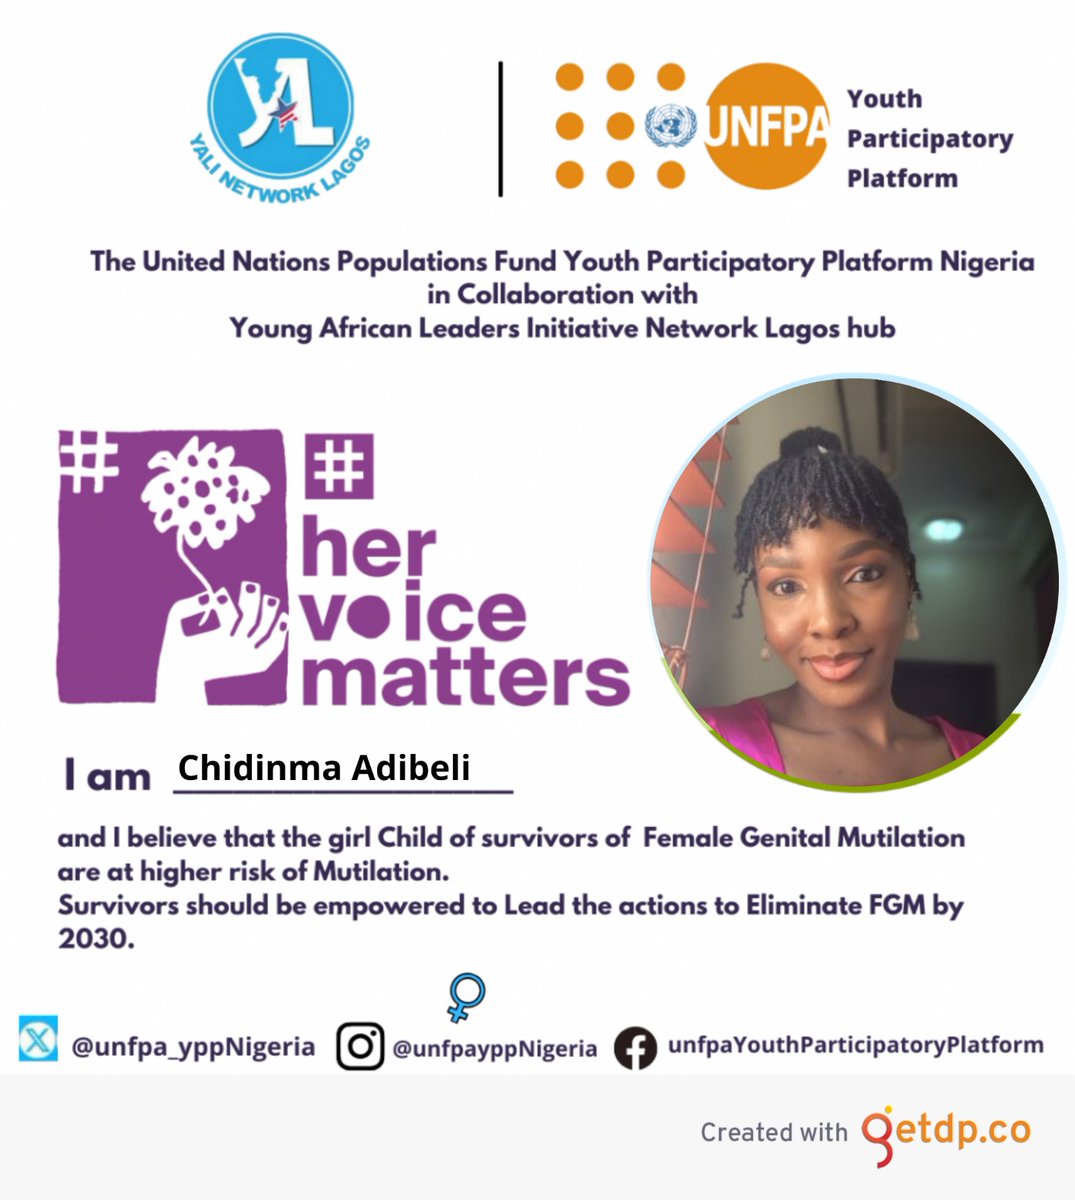 Join in lending your voice against FGM & harmful practices that continues to widen the chokehold of inequalities and breeding discrimination.

#hervoicematters 
#EndFGM
#endfgm2030
#endviolenceagainstwomenandgirls
#unfpayppNG

 @unfpayppnigeria @UNFPANigeria @yalinetworklag